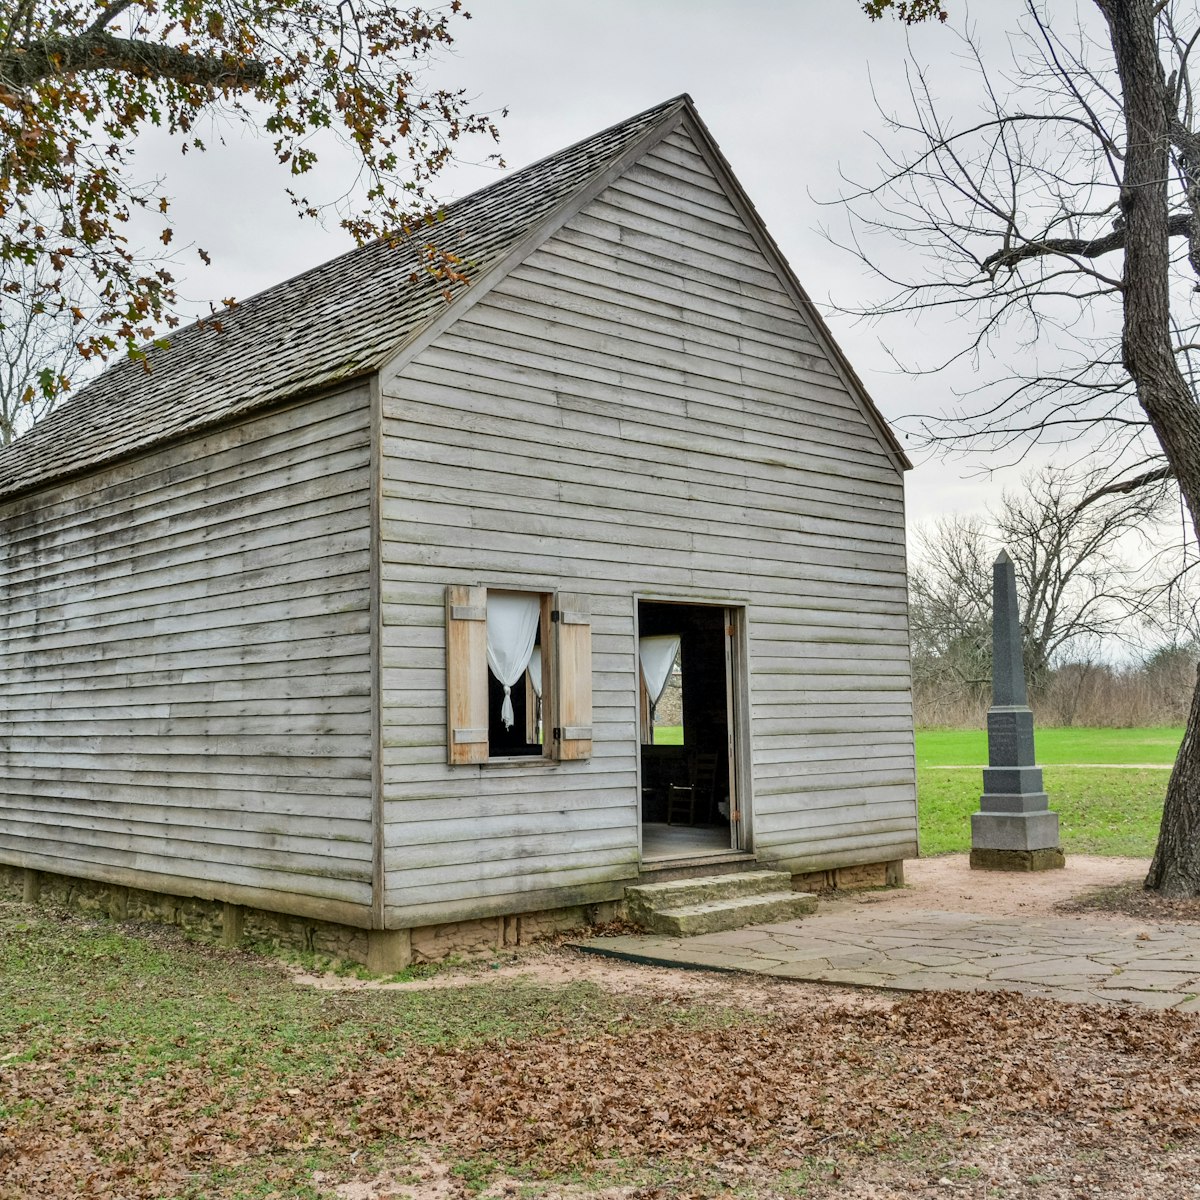 Replica of Independence Hall in Washington-on-the-Brazos, where the Declaration of Texas Independence was signed in 1836.